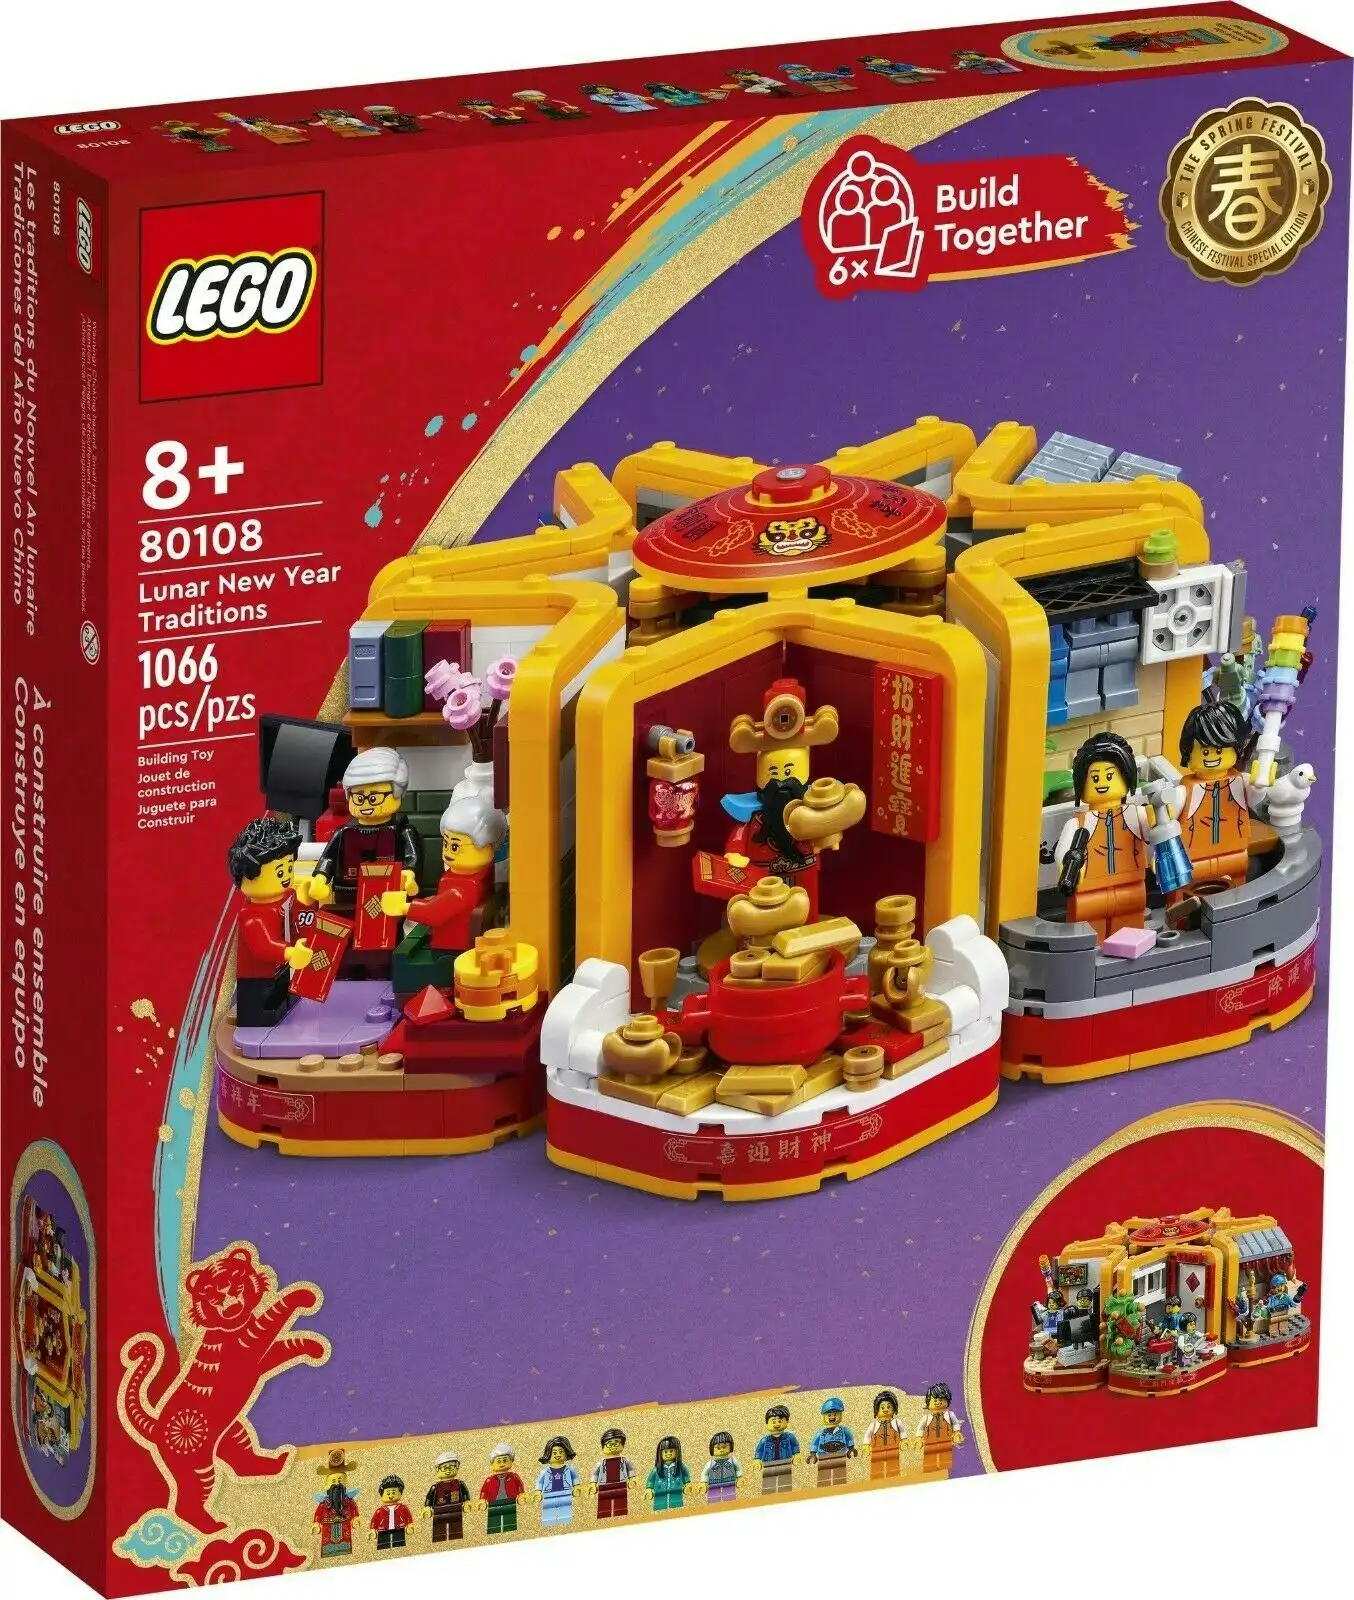 LEGO 80108 Lunar New Year Traditions - Chinese Festivals